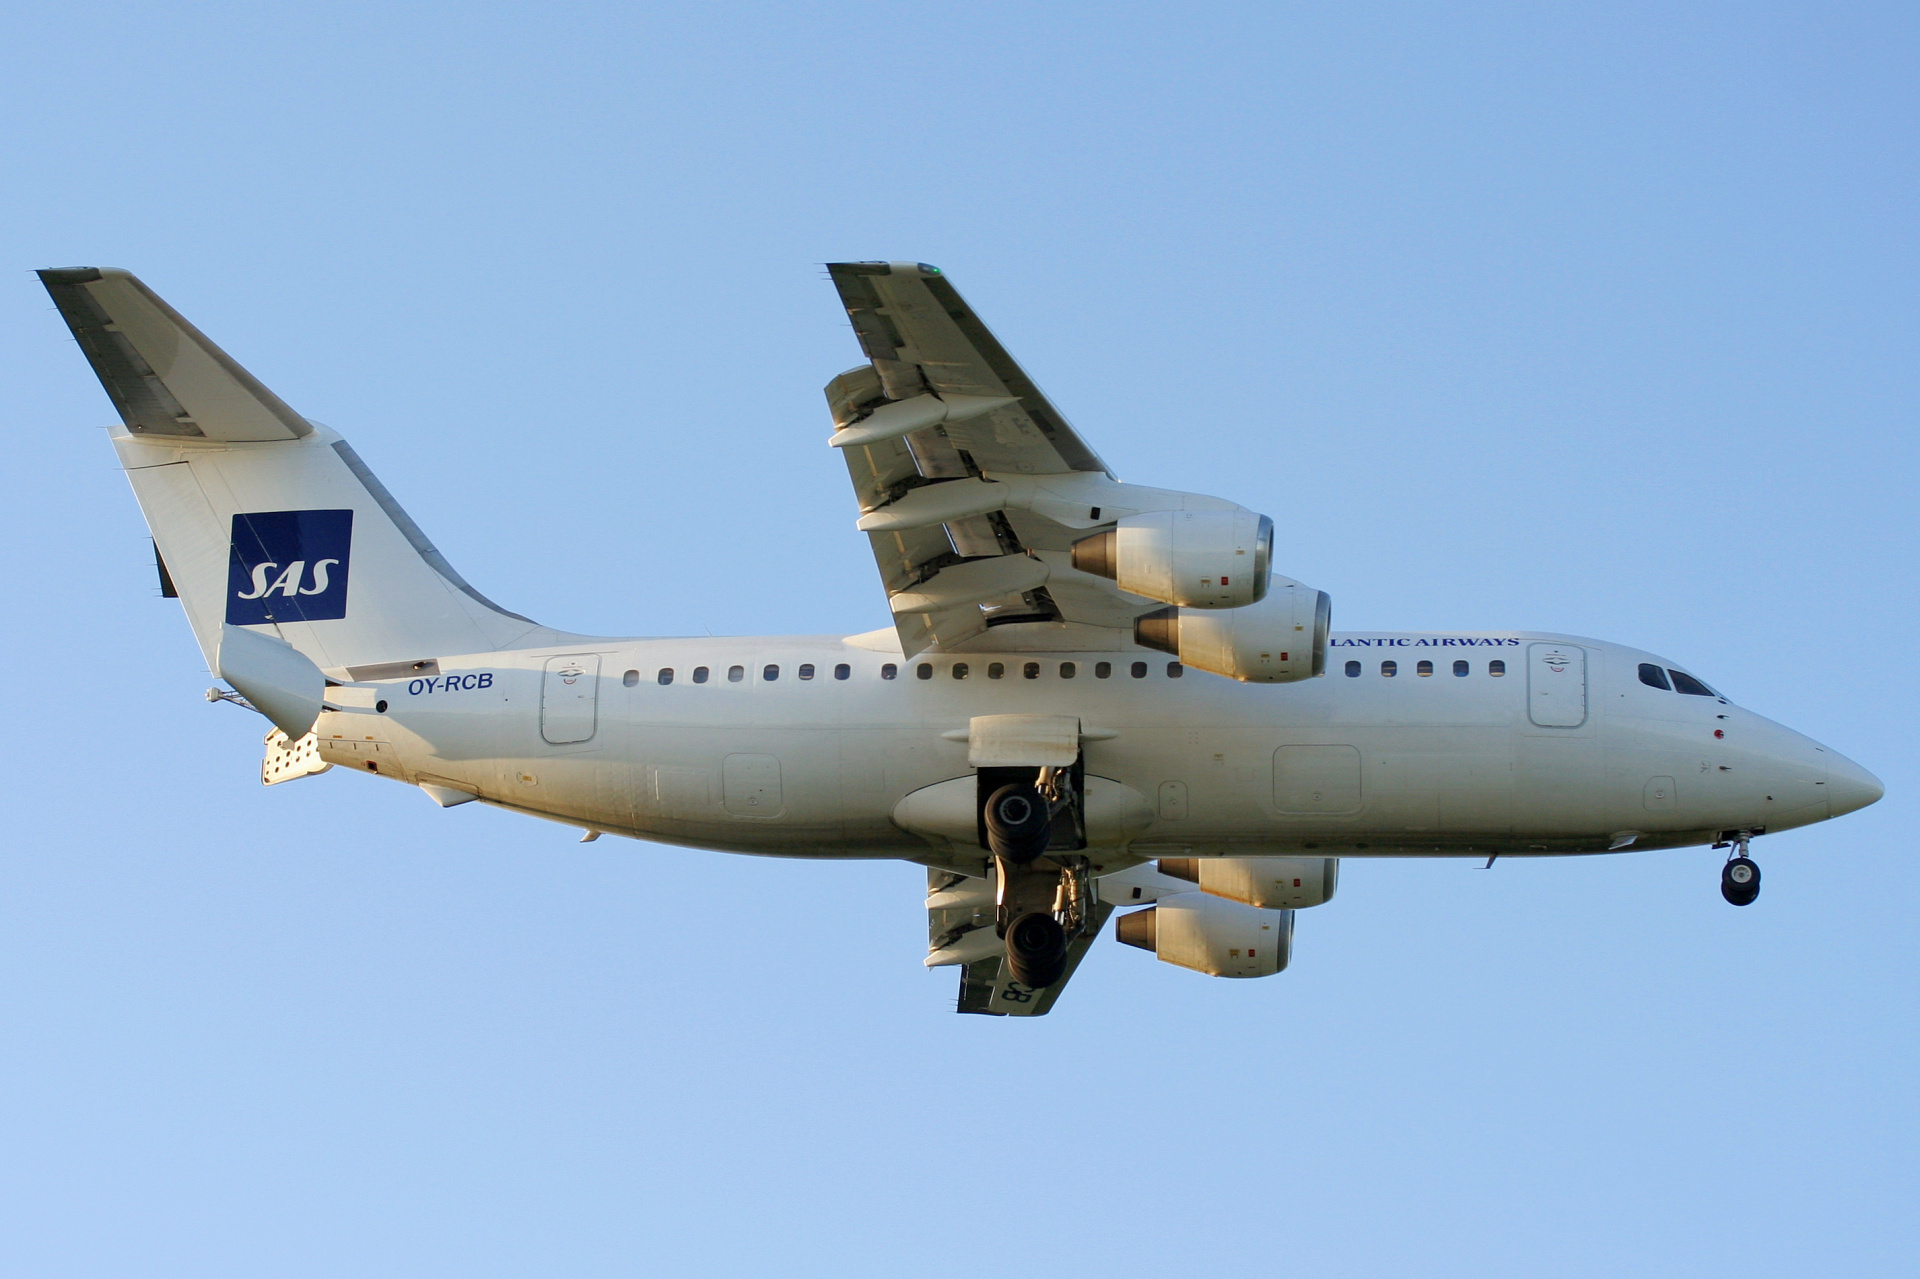 146-200, OY-RCB, SAS Scandinavian Airlines (Atlantic Airways) (Aircraft » EPWA Spotting » BAe 146 and revisions)